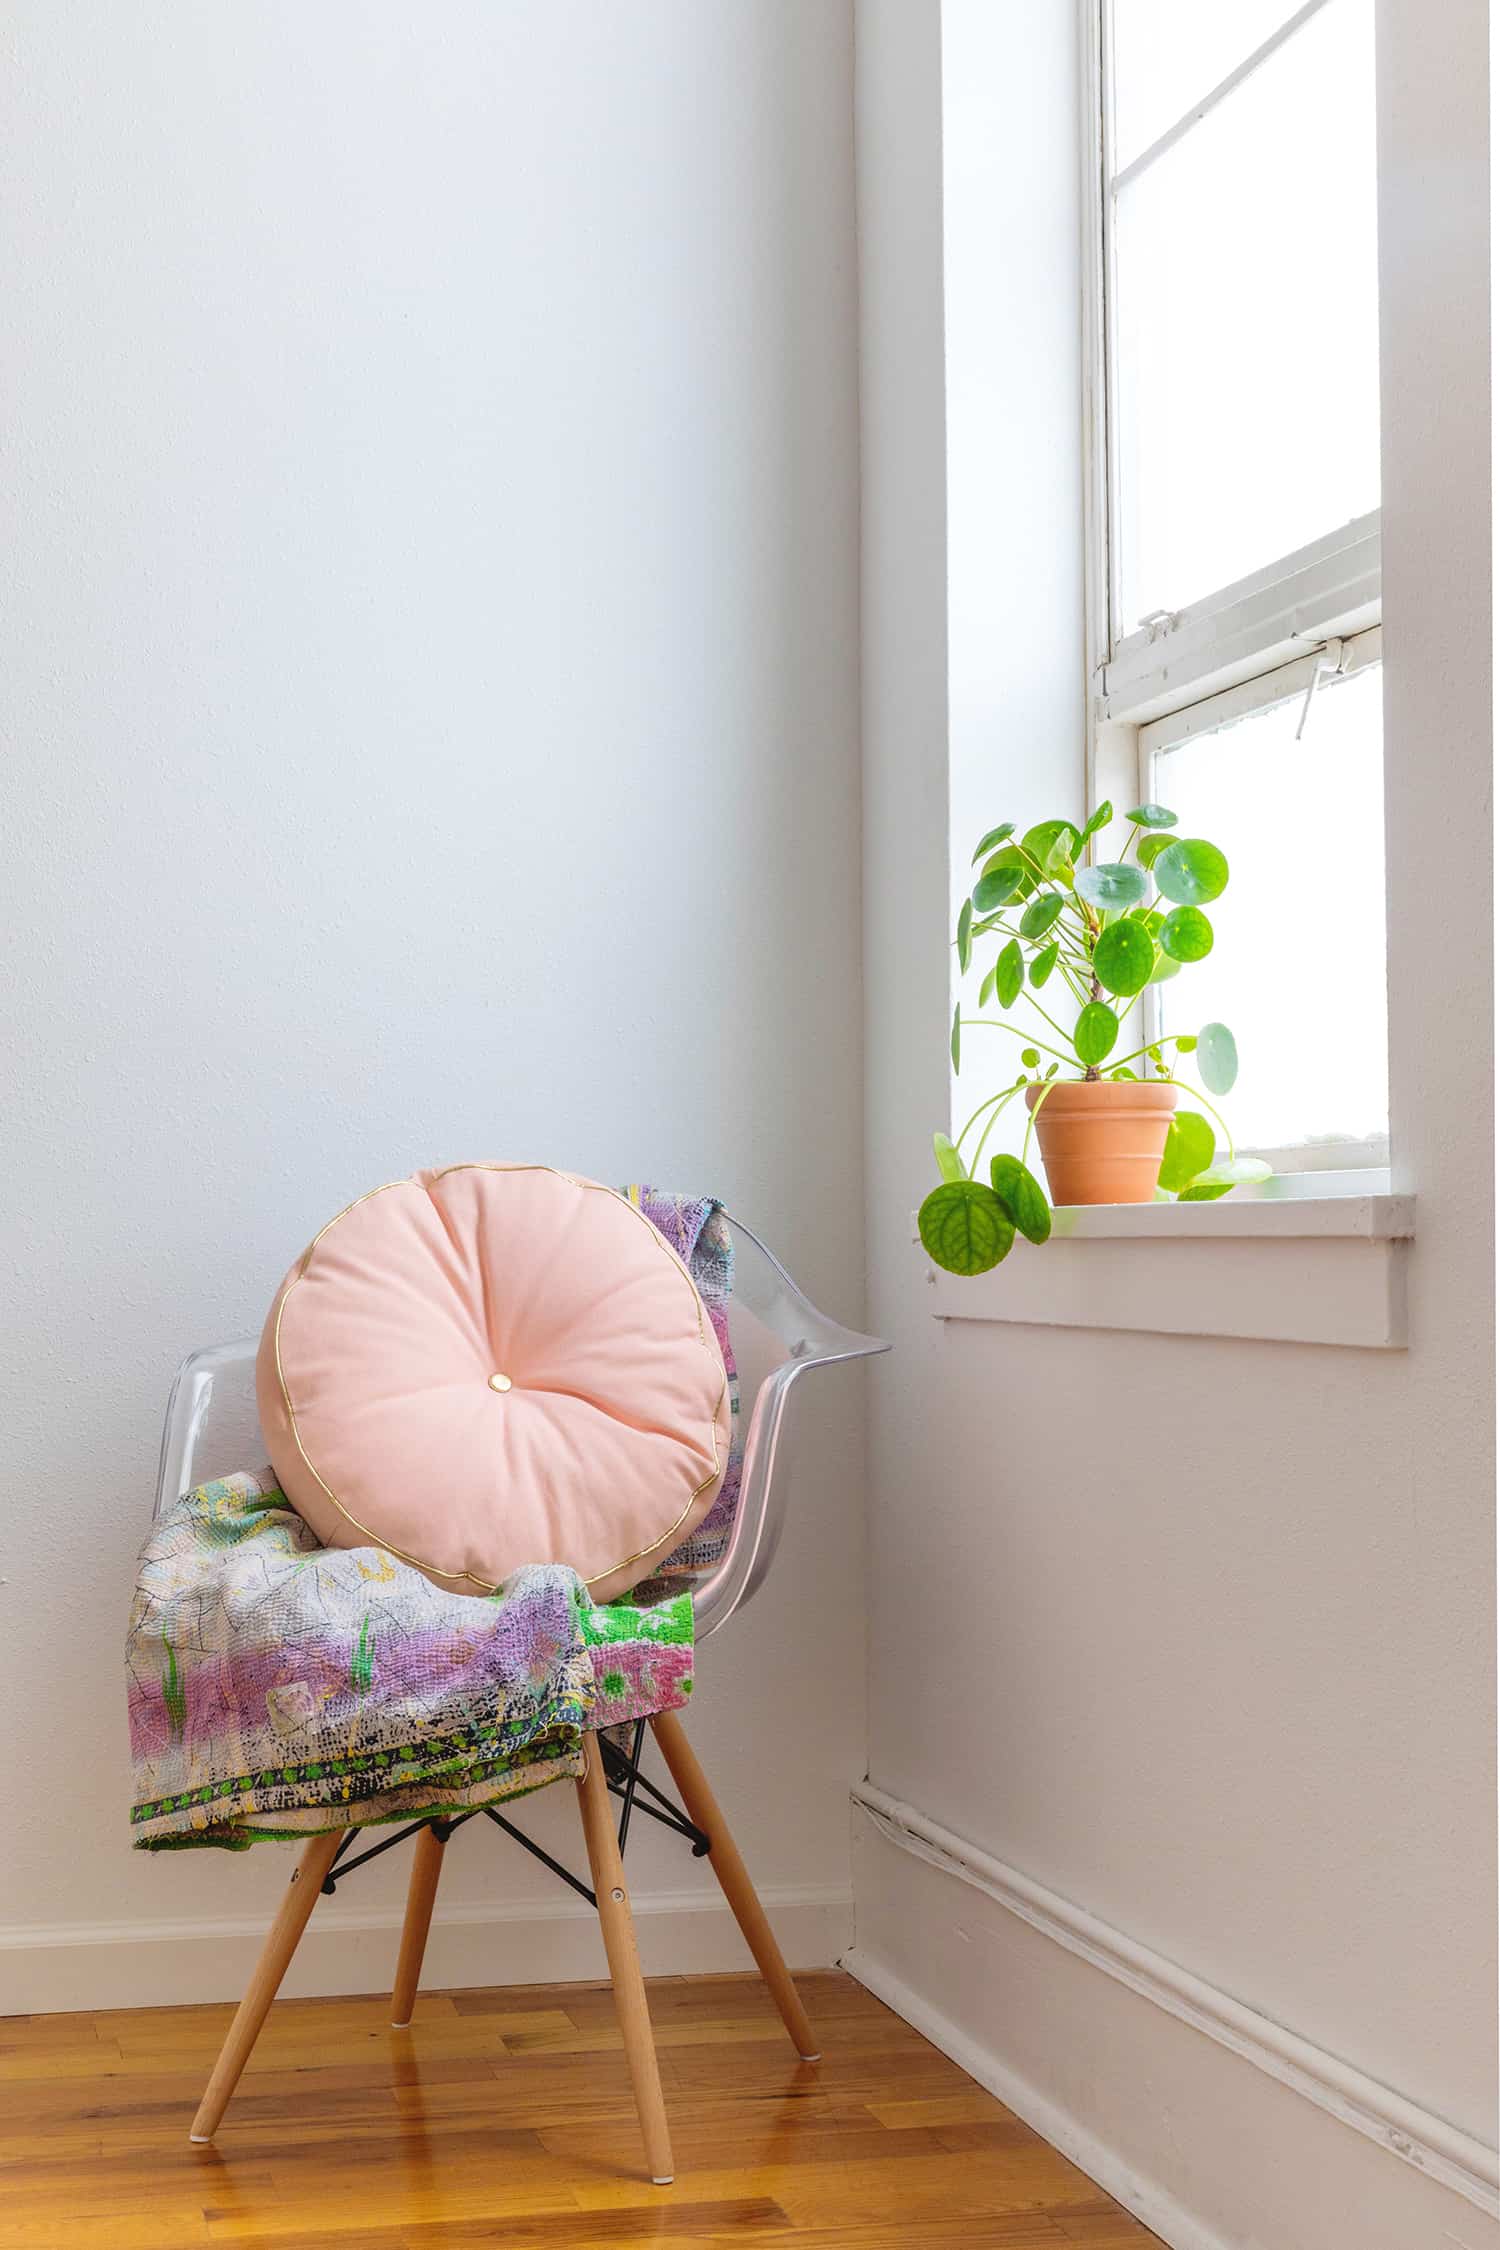 clear chair with blanket and pink pillow on it next to a window with a plant on the window sill